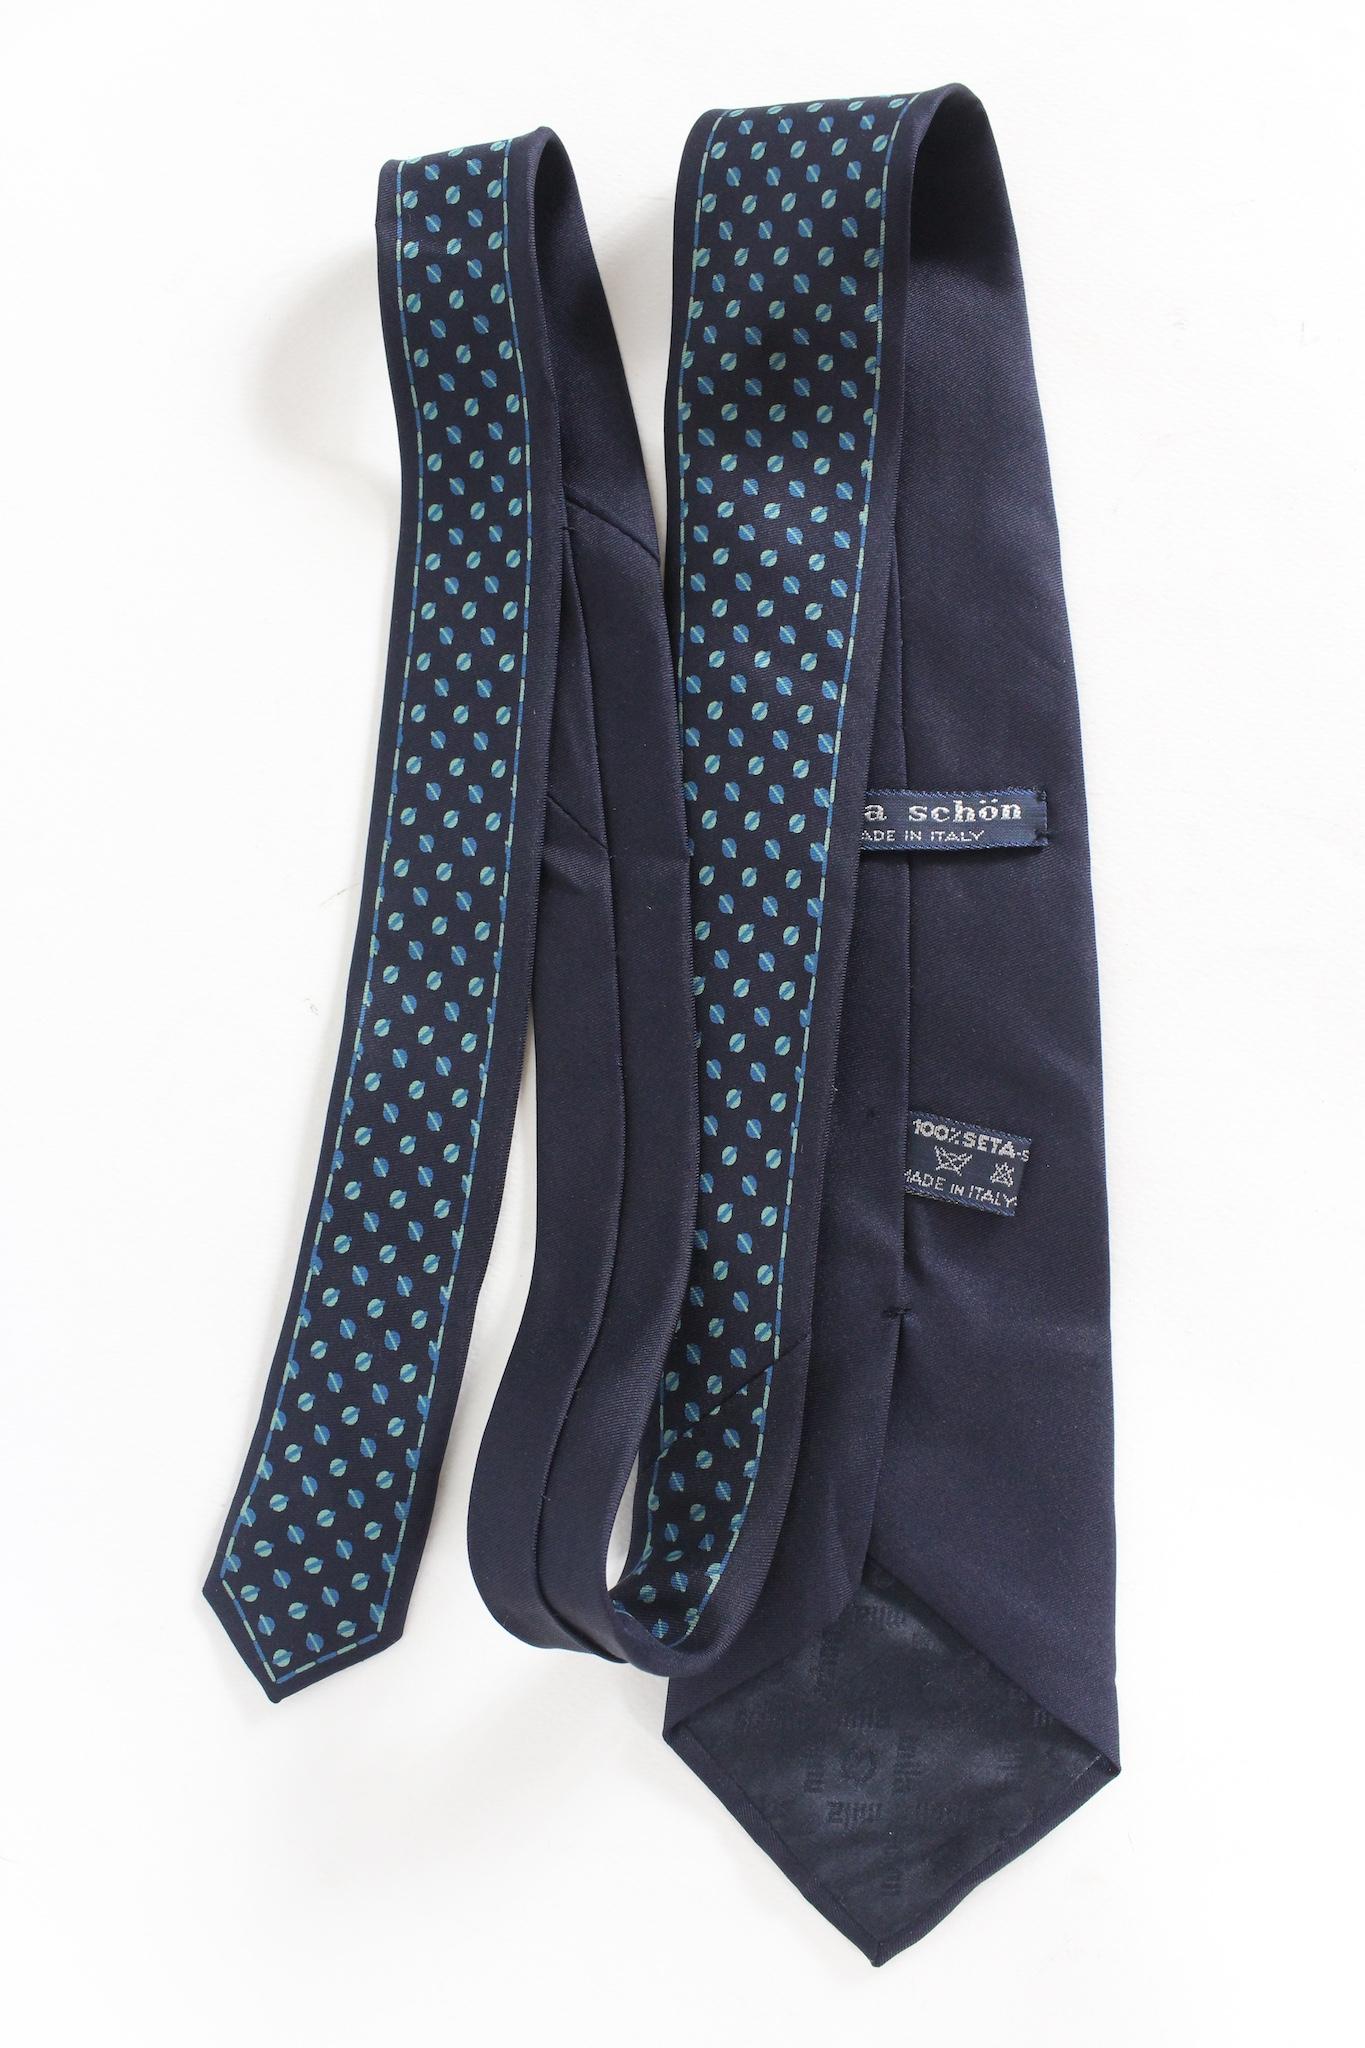 Mila Schon vintage 90s tie. Blue color with light blue geometric designs. 100% silk fabric. Made in italy.

Length: 138 cm
Width: 8.5 cm